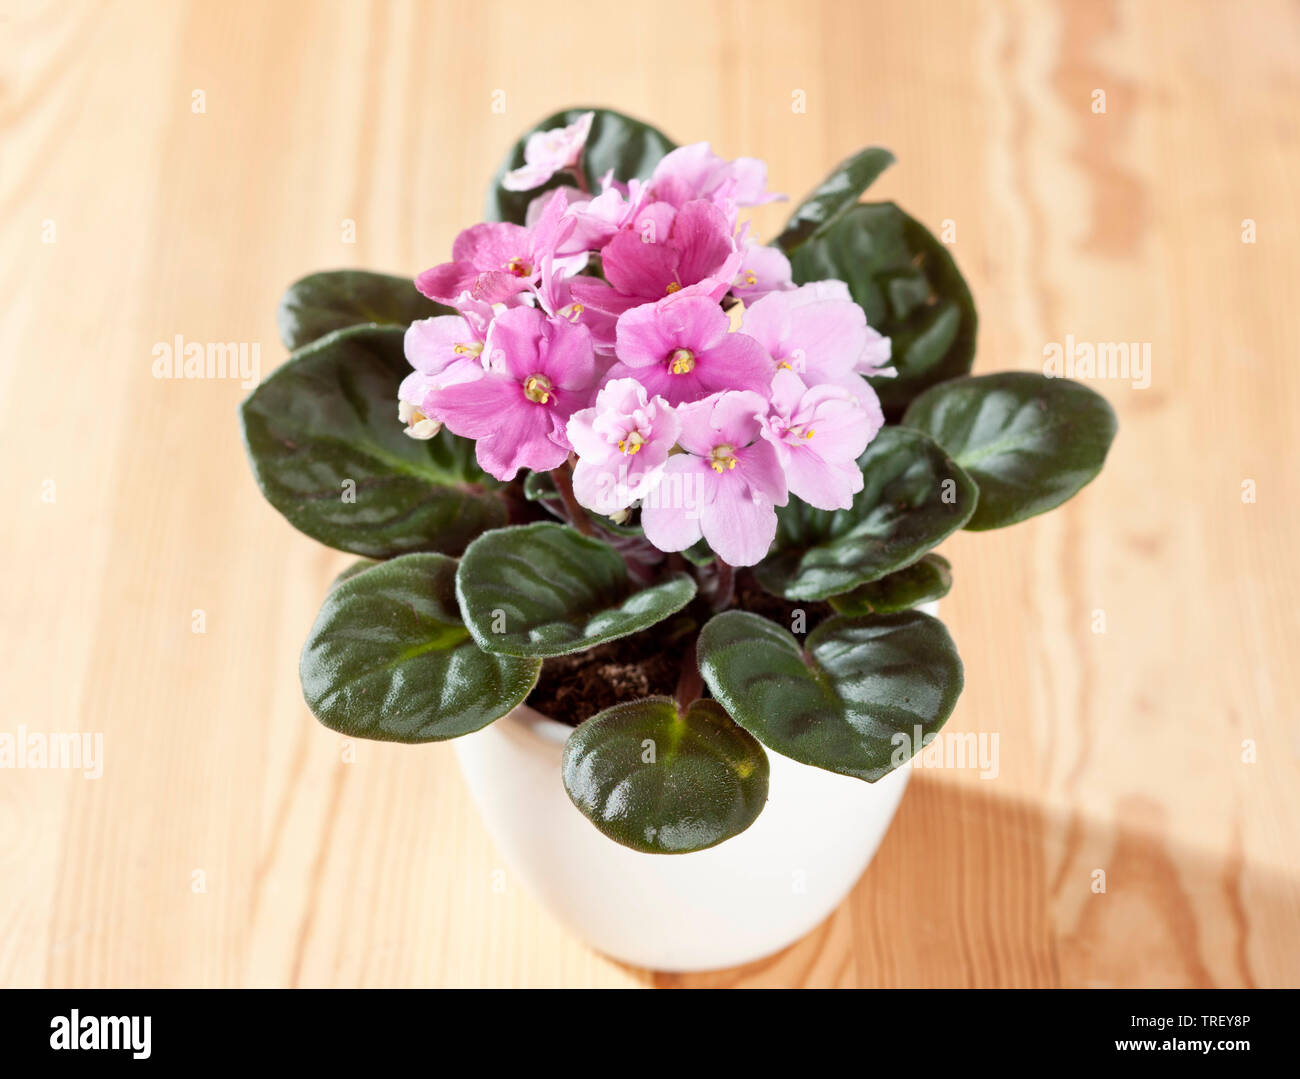 Saintpaulia, African Violet (Saintpaulia ionantha-Hybride), potted plant with pink flowers on a wooden table. Germany Stock Photo